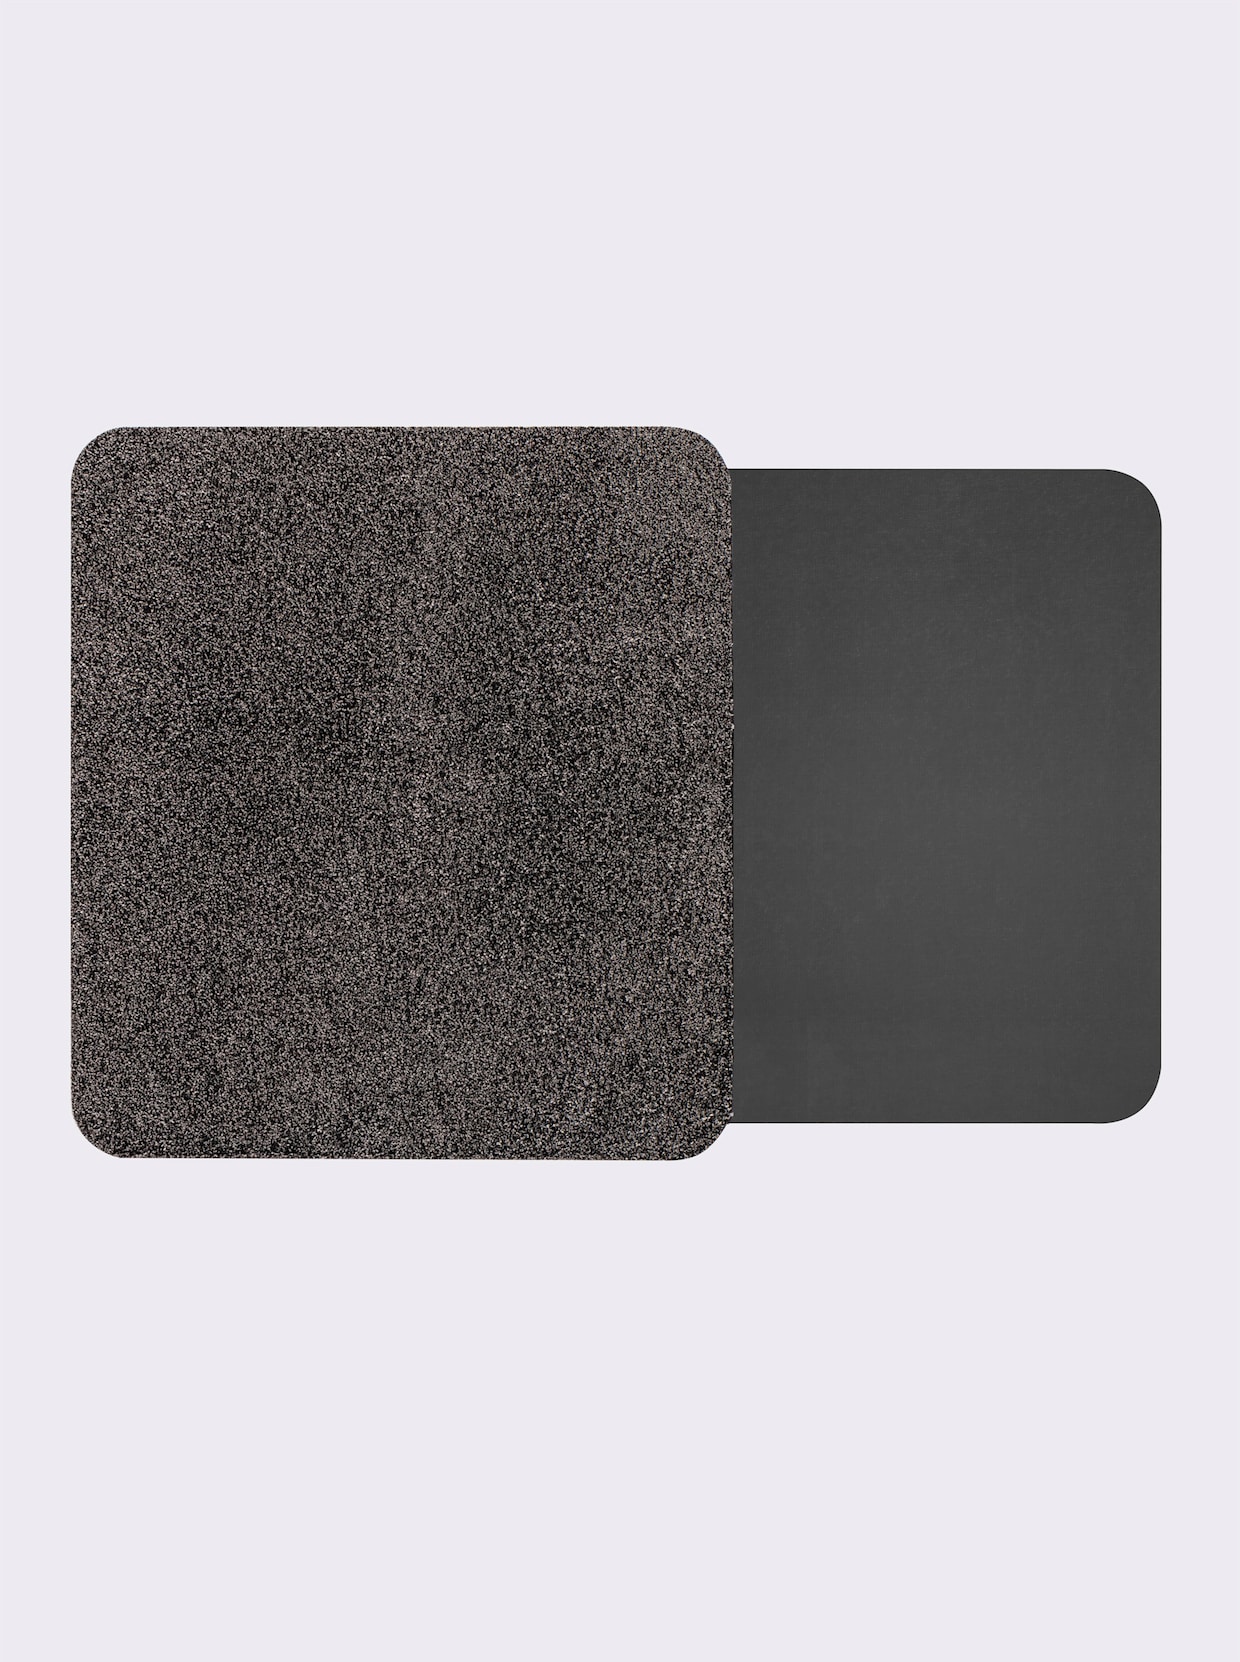 wash&dry Paillasson - anthracite